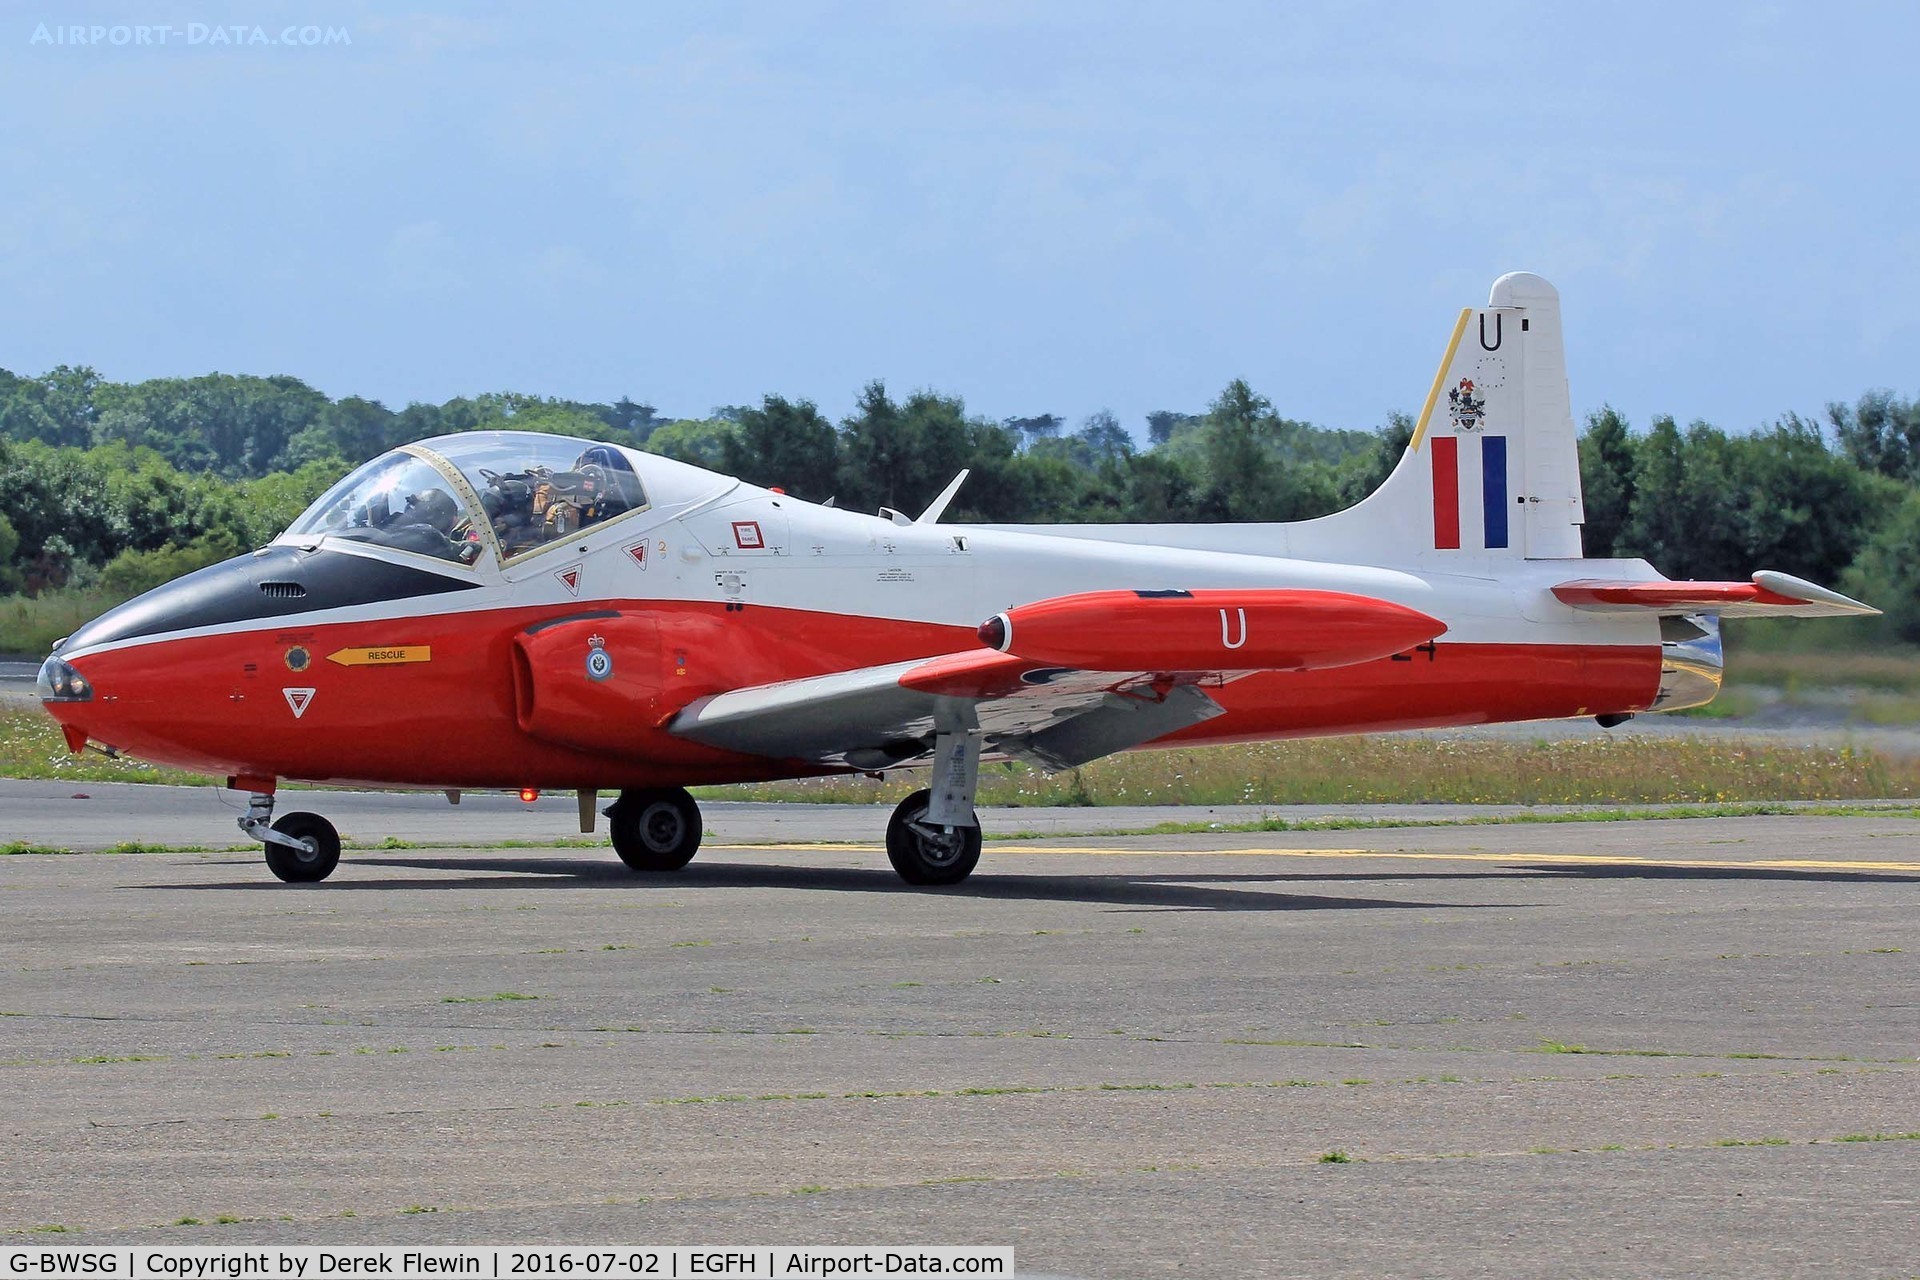 G-BWSG, 1970 BAC 84 Jet Provost T.5 C/N EEP/JP/988, Jet Provost T.5, East Midlands based, previously XW324, seen arriving at EGFH for the WNAS16.